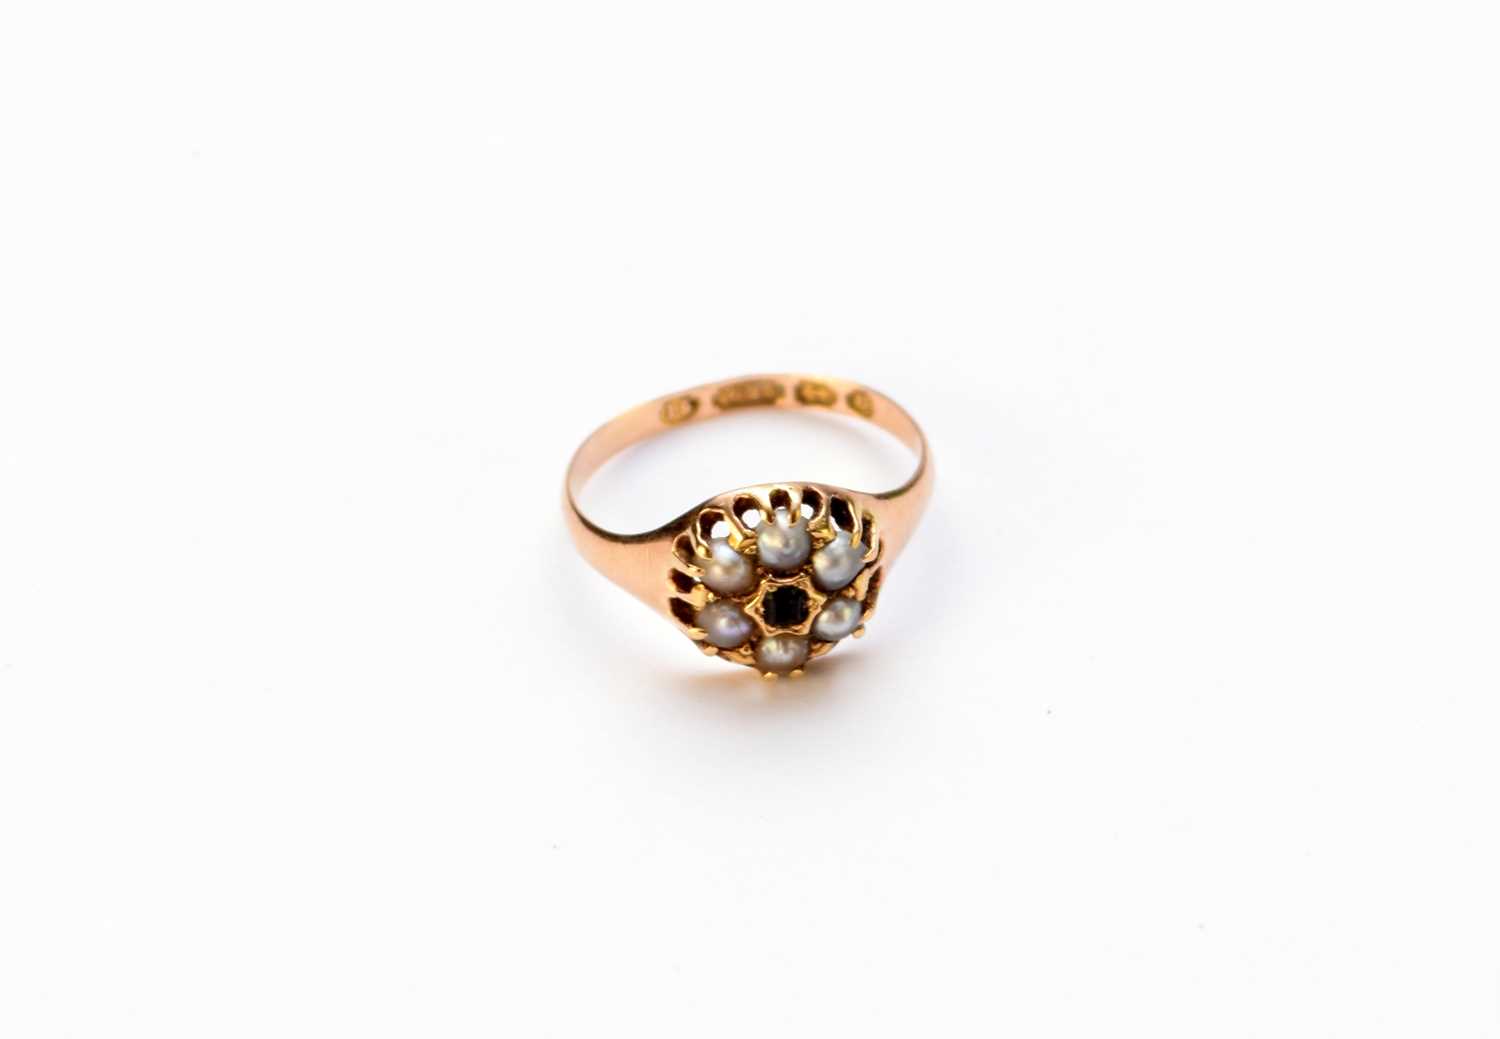 Lot 44 - A Victorian 15ct gold ring